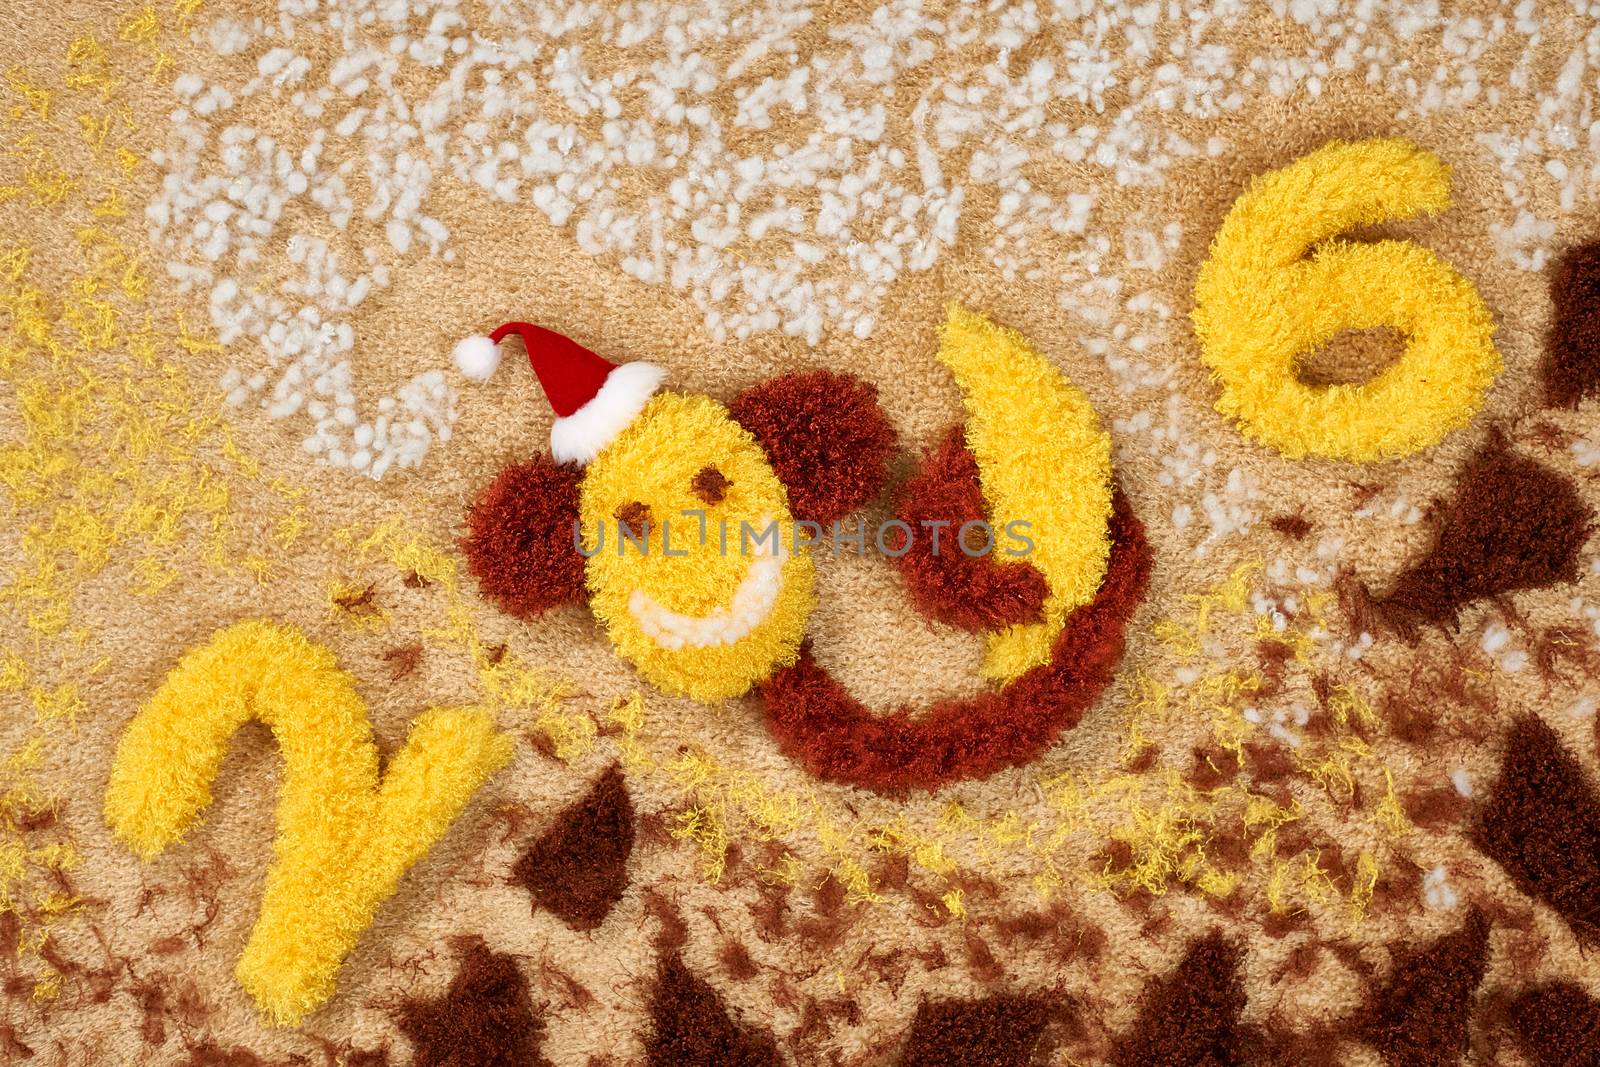 New Year 2016. Christmas.Funny monkey in Santa hat with banana. Happy vivid festive still life. Yellow fabric digits handmade. Playful fluffy party decoration.Shaggy unusual holiday card, copyspace